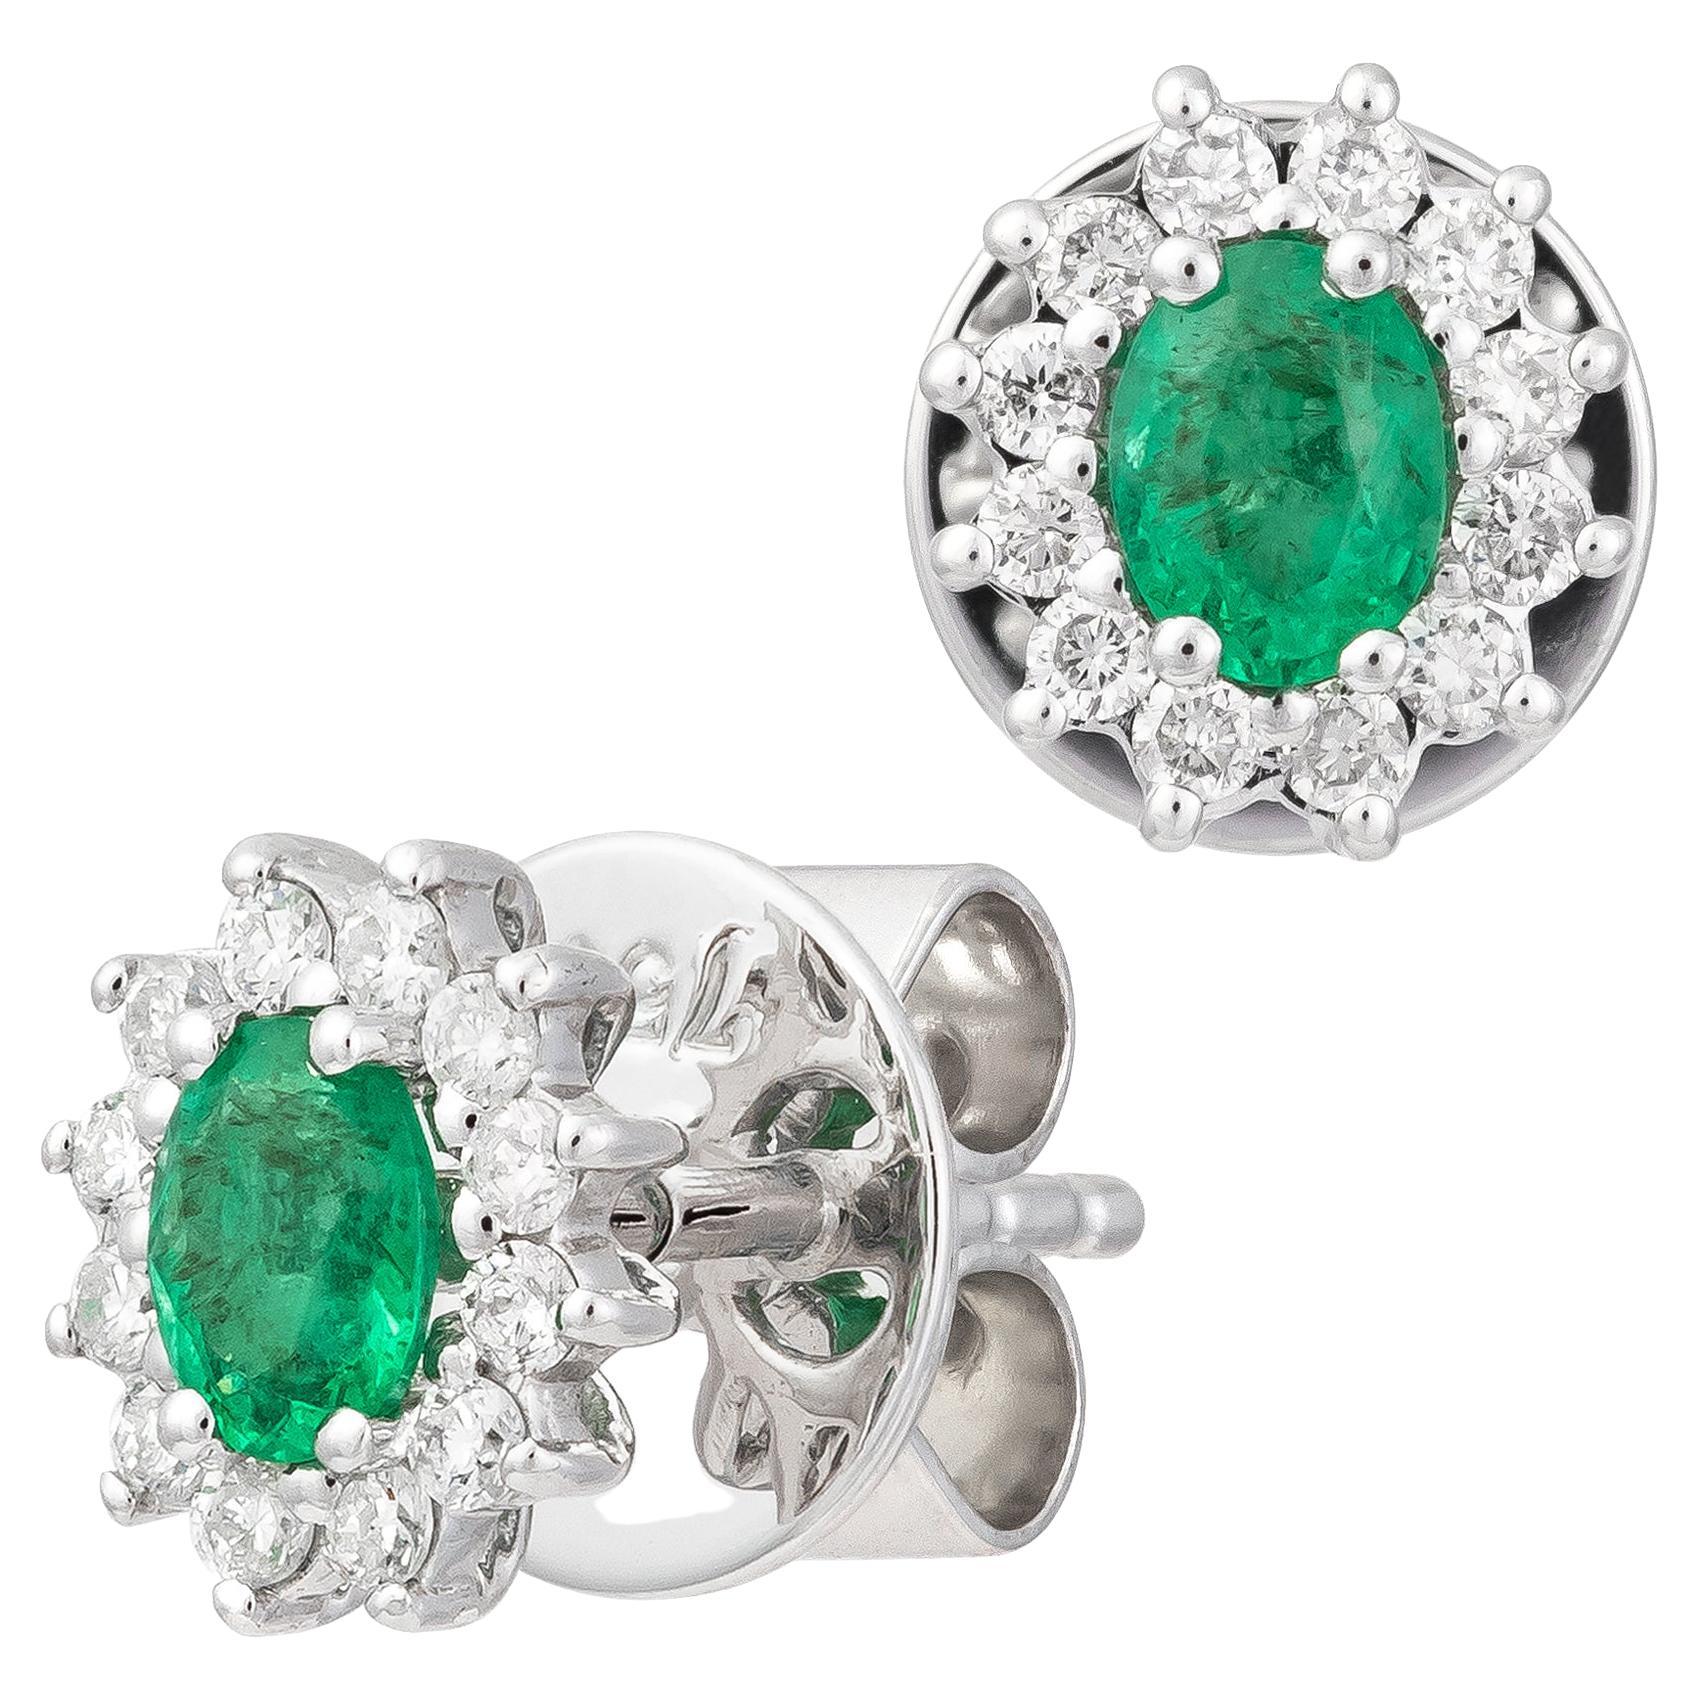 Every Day White Gold 18K Earrings Emerald Diamond for Her